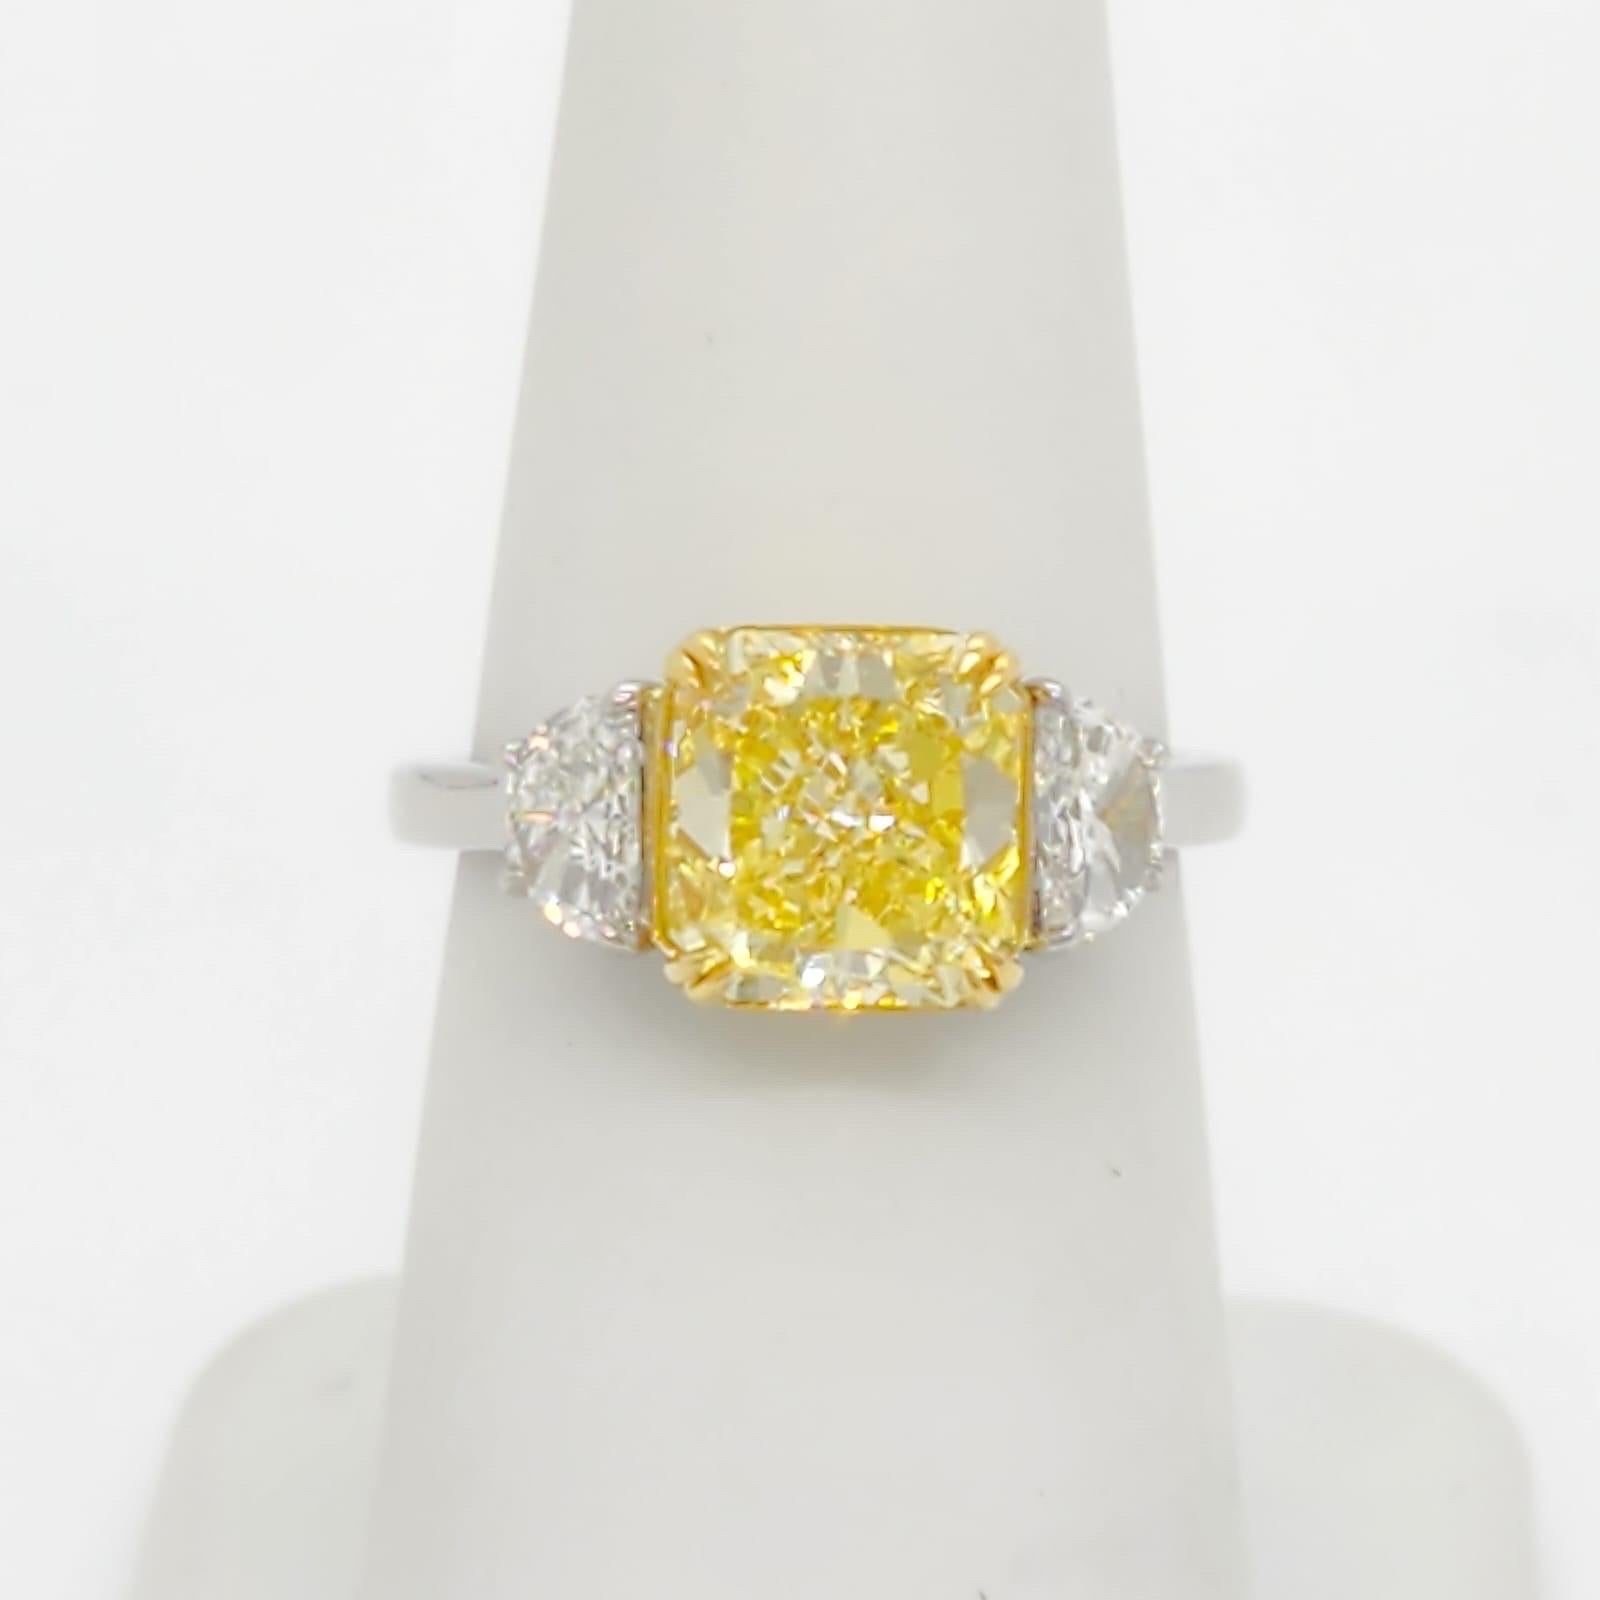 Gorgeous 2.73 ct. fancy intense yellow diamond radiant with two 0.60 ct. white diamond half moon shapes.  GIA certified.  Ring size 6.5.